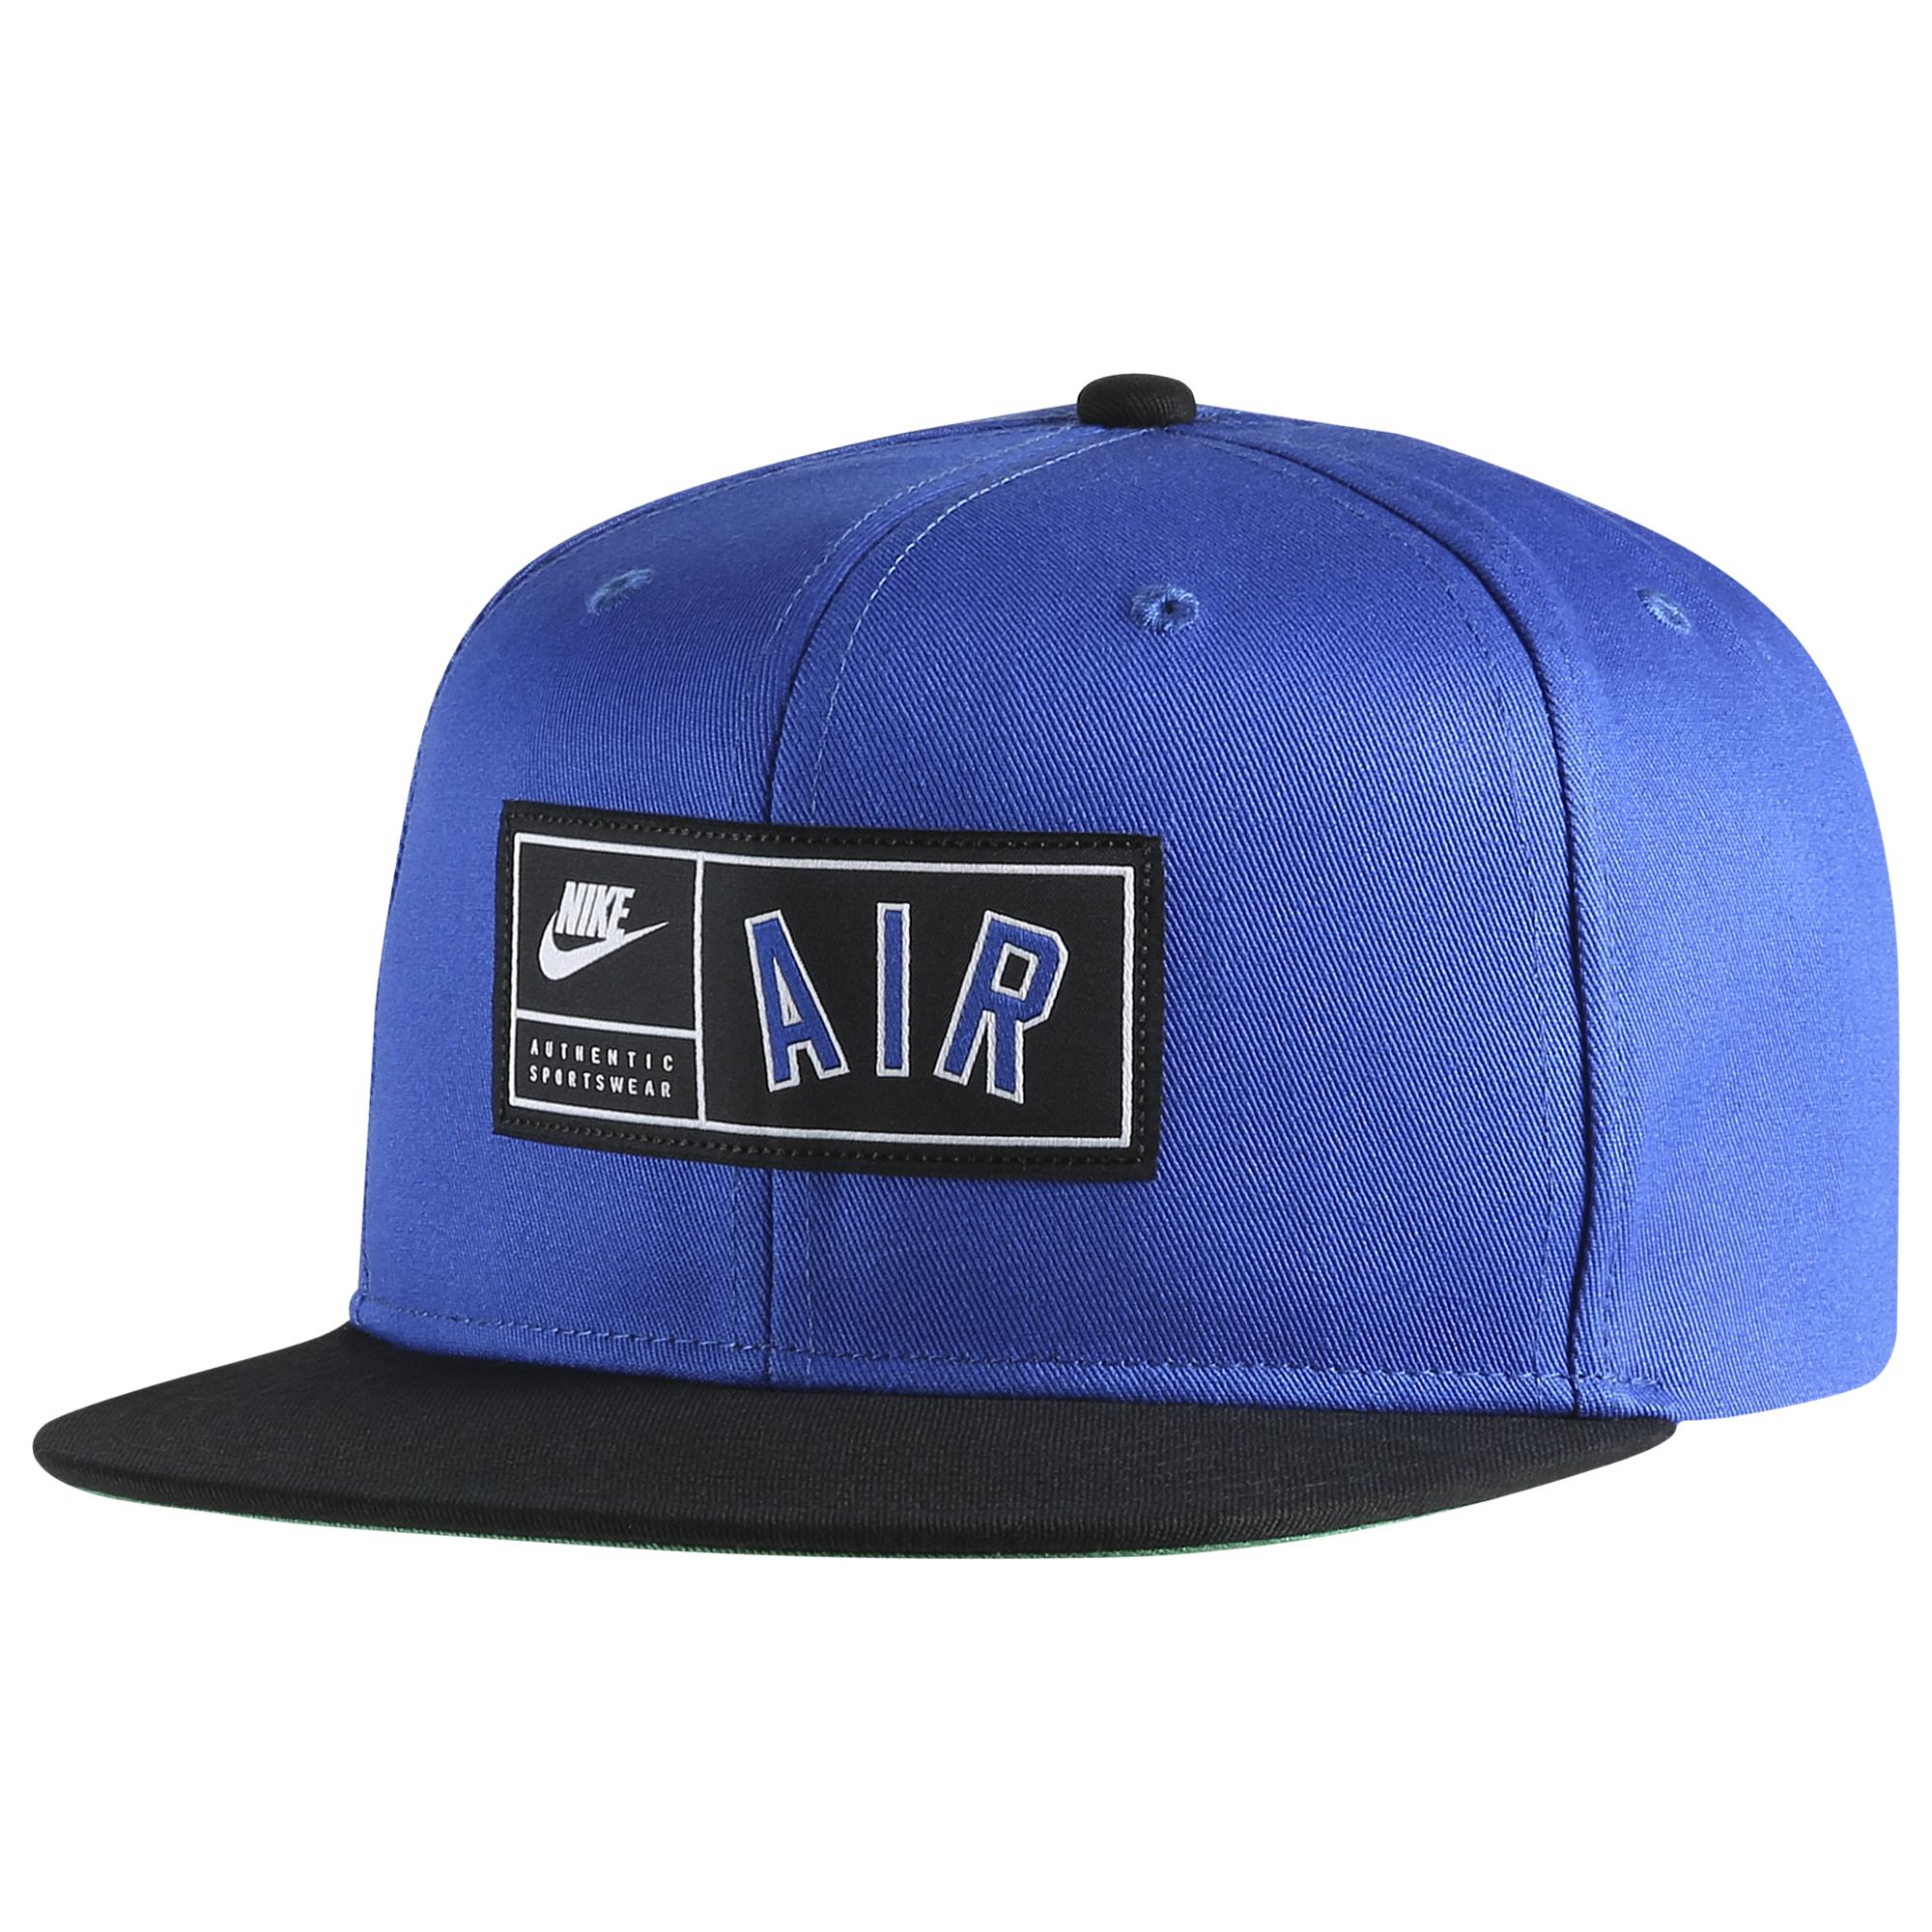 Nike Air Pro Cap In Blue For Men Lyst